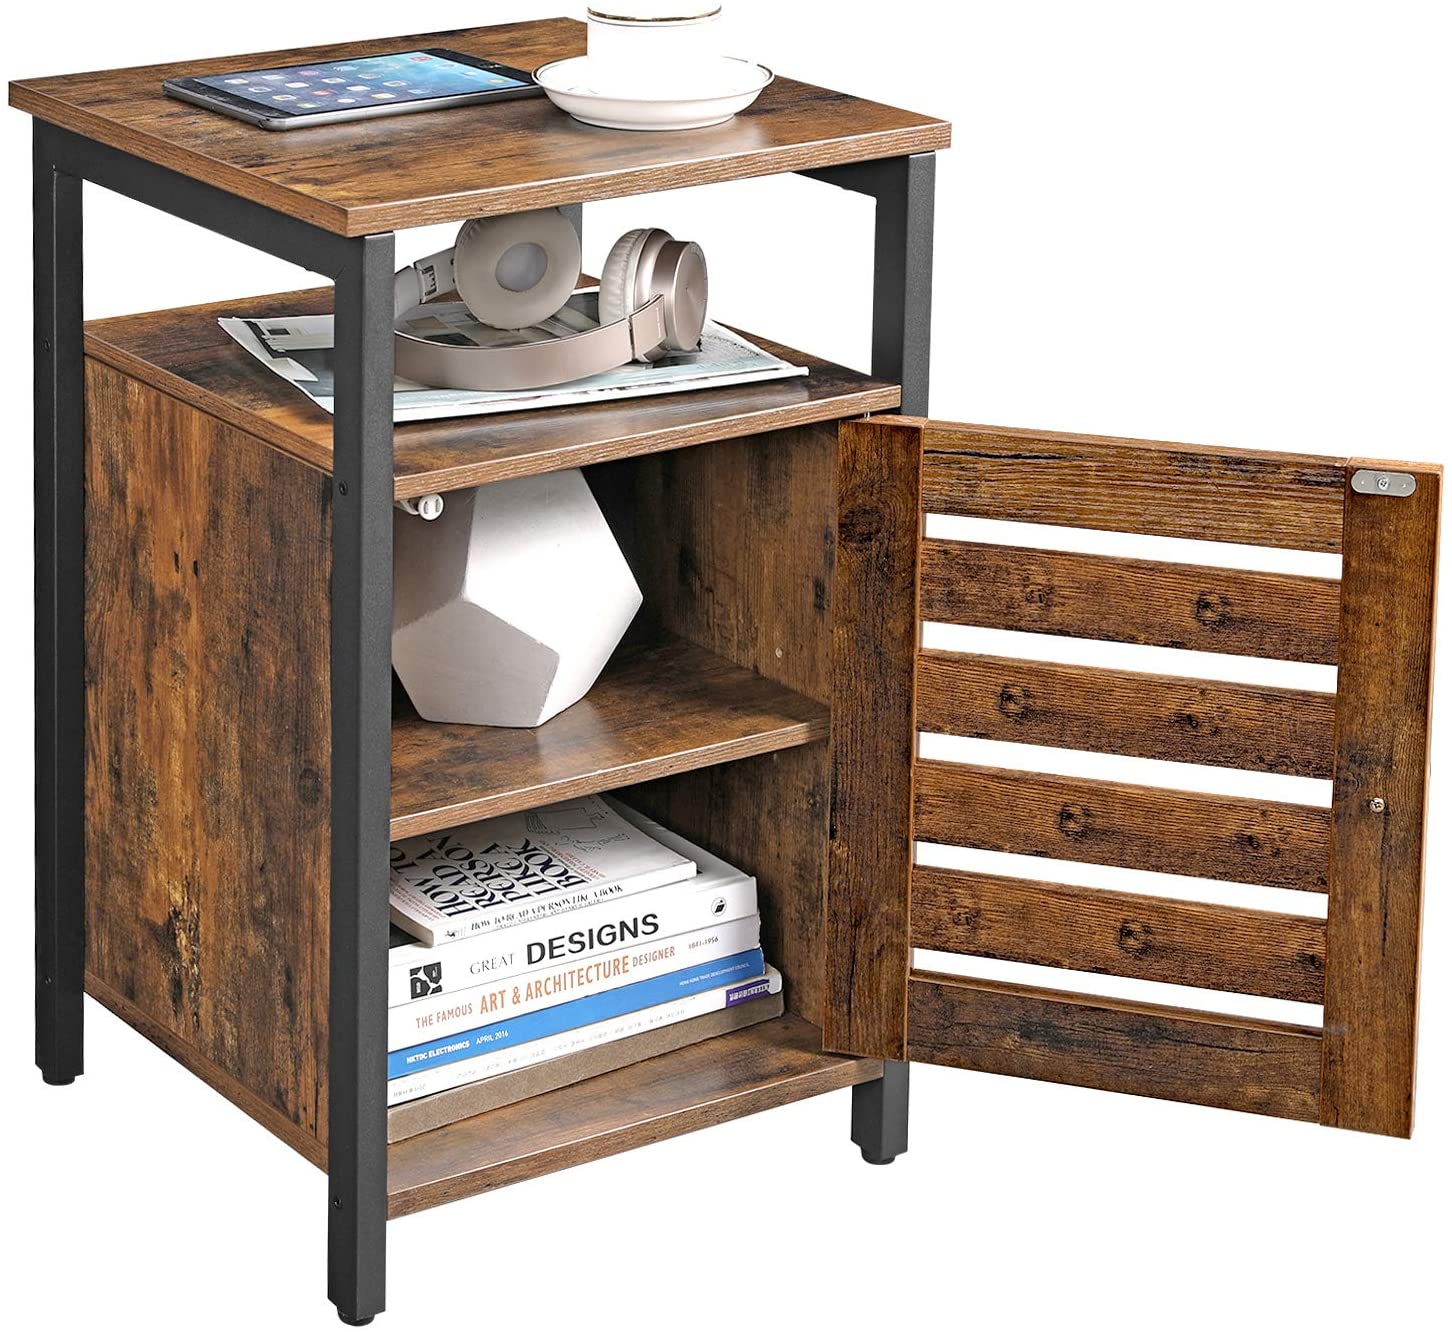 Out of Stock, sorry! Free Shipping on this Bedside Table with 2 Adjustable Shelves Rustic Brown and Black